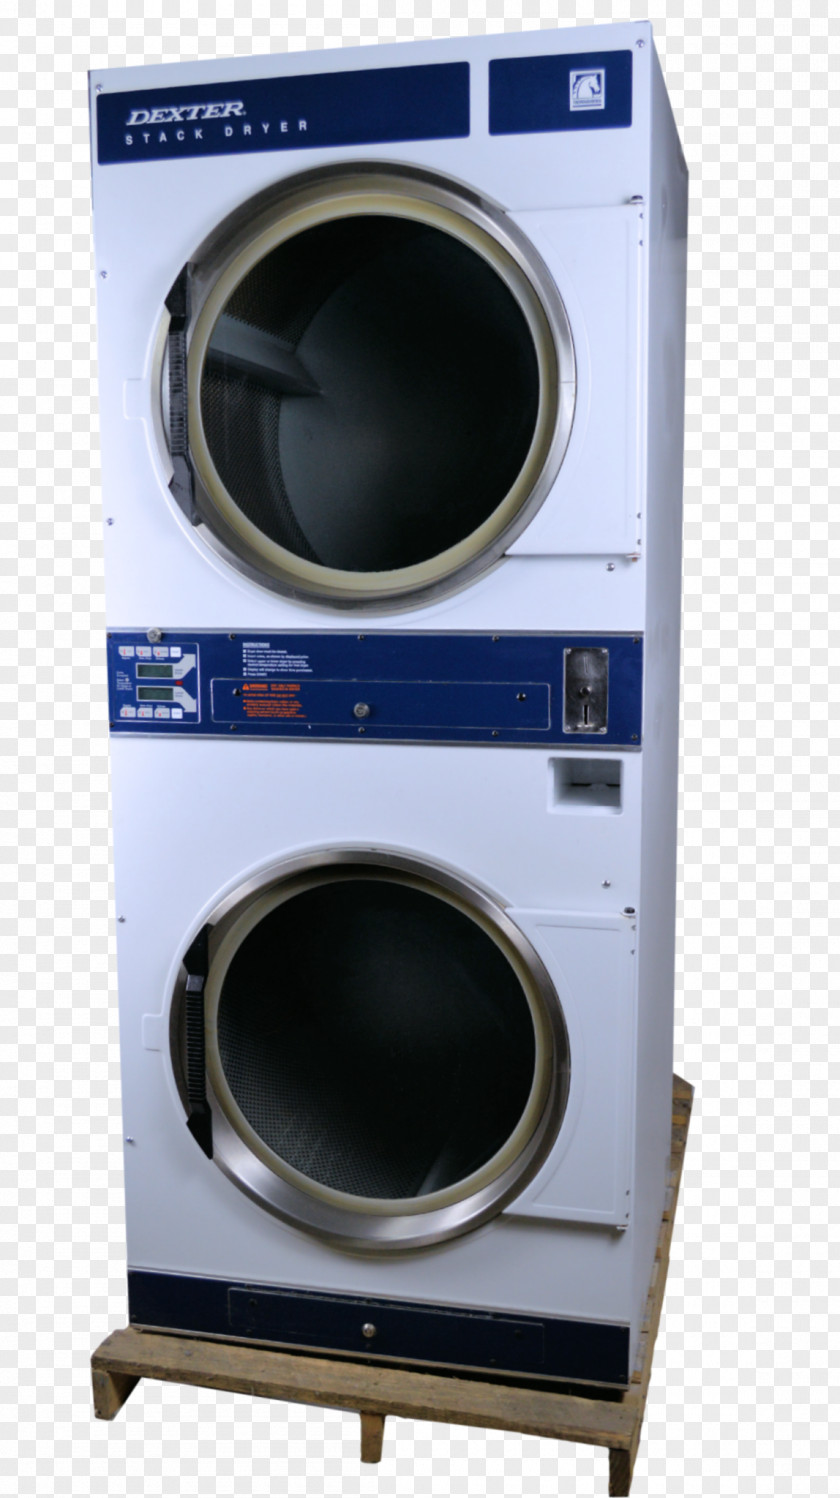 Cosmetic Model Clothes Dryer Laundry Room Washing Machines Combo Washer PNG